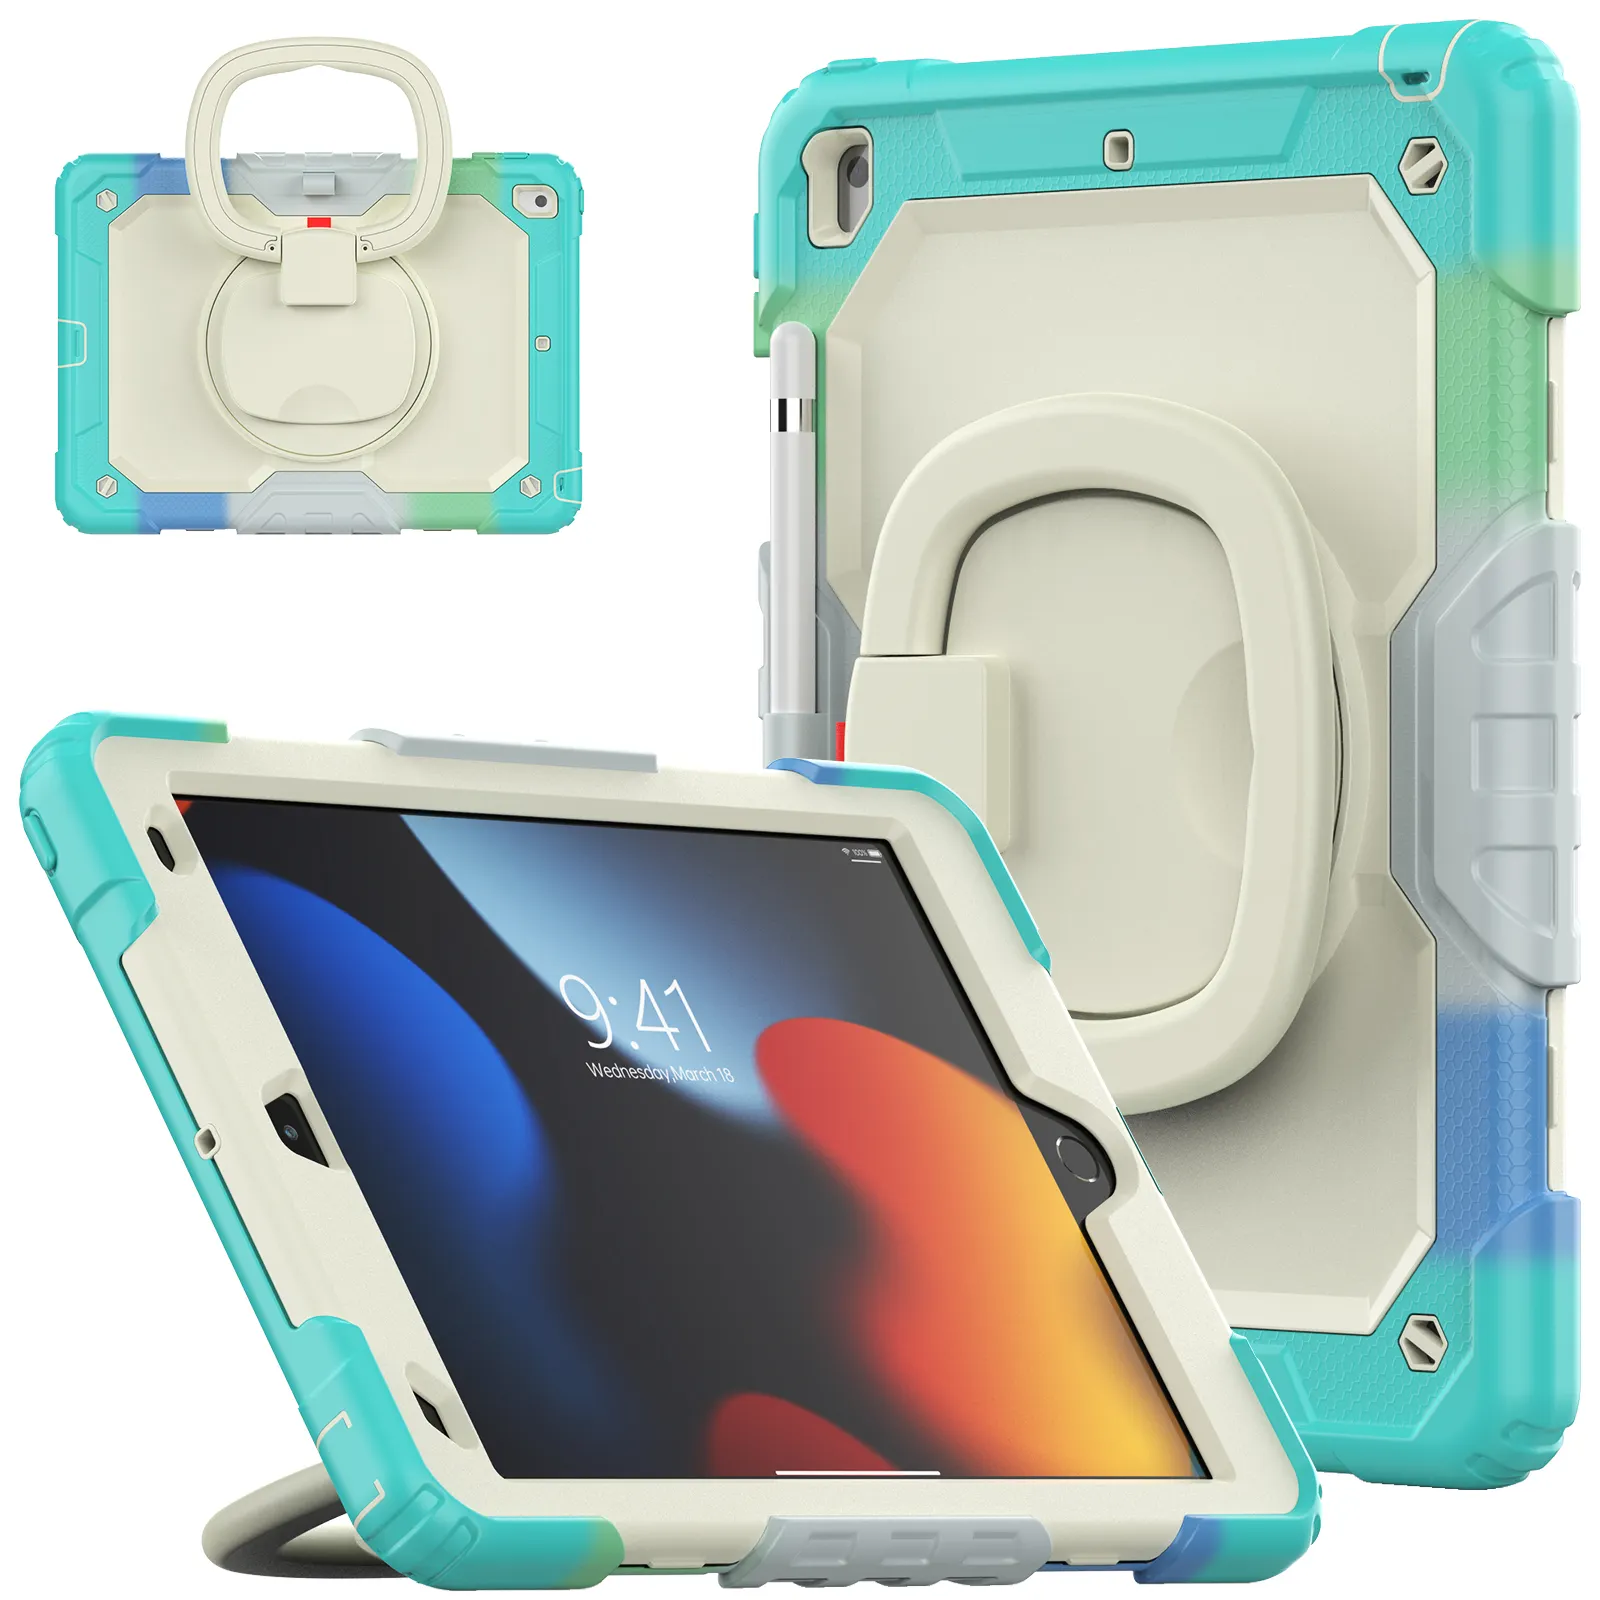 Hot Selling Rainbow Color Silicone case For iPad 10.2 air 4 Mini Full Body Protective Tablet Cover For Samsung A8